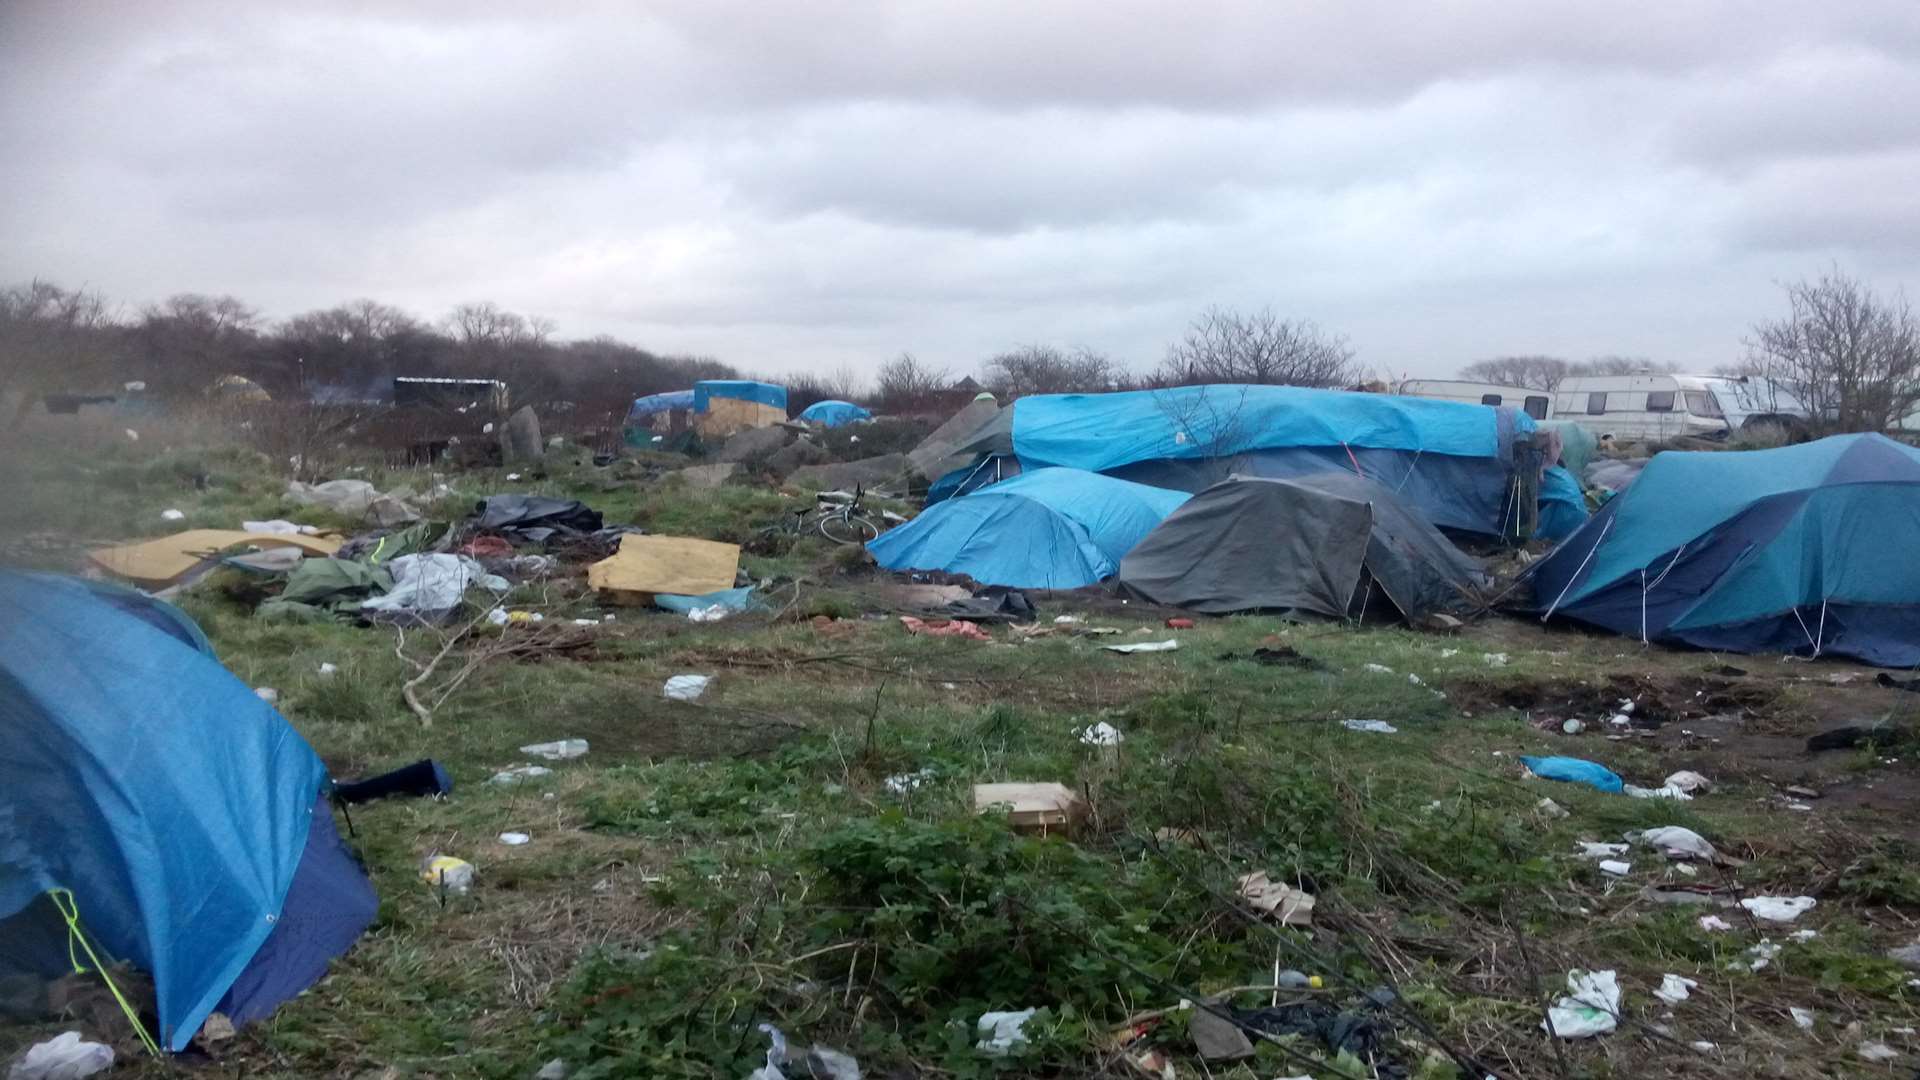 People have been forced to live in squalor in the migrant camp known as the 'jungle' in Calais